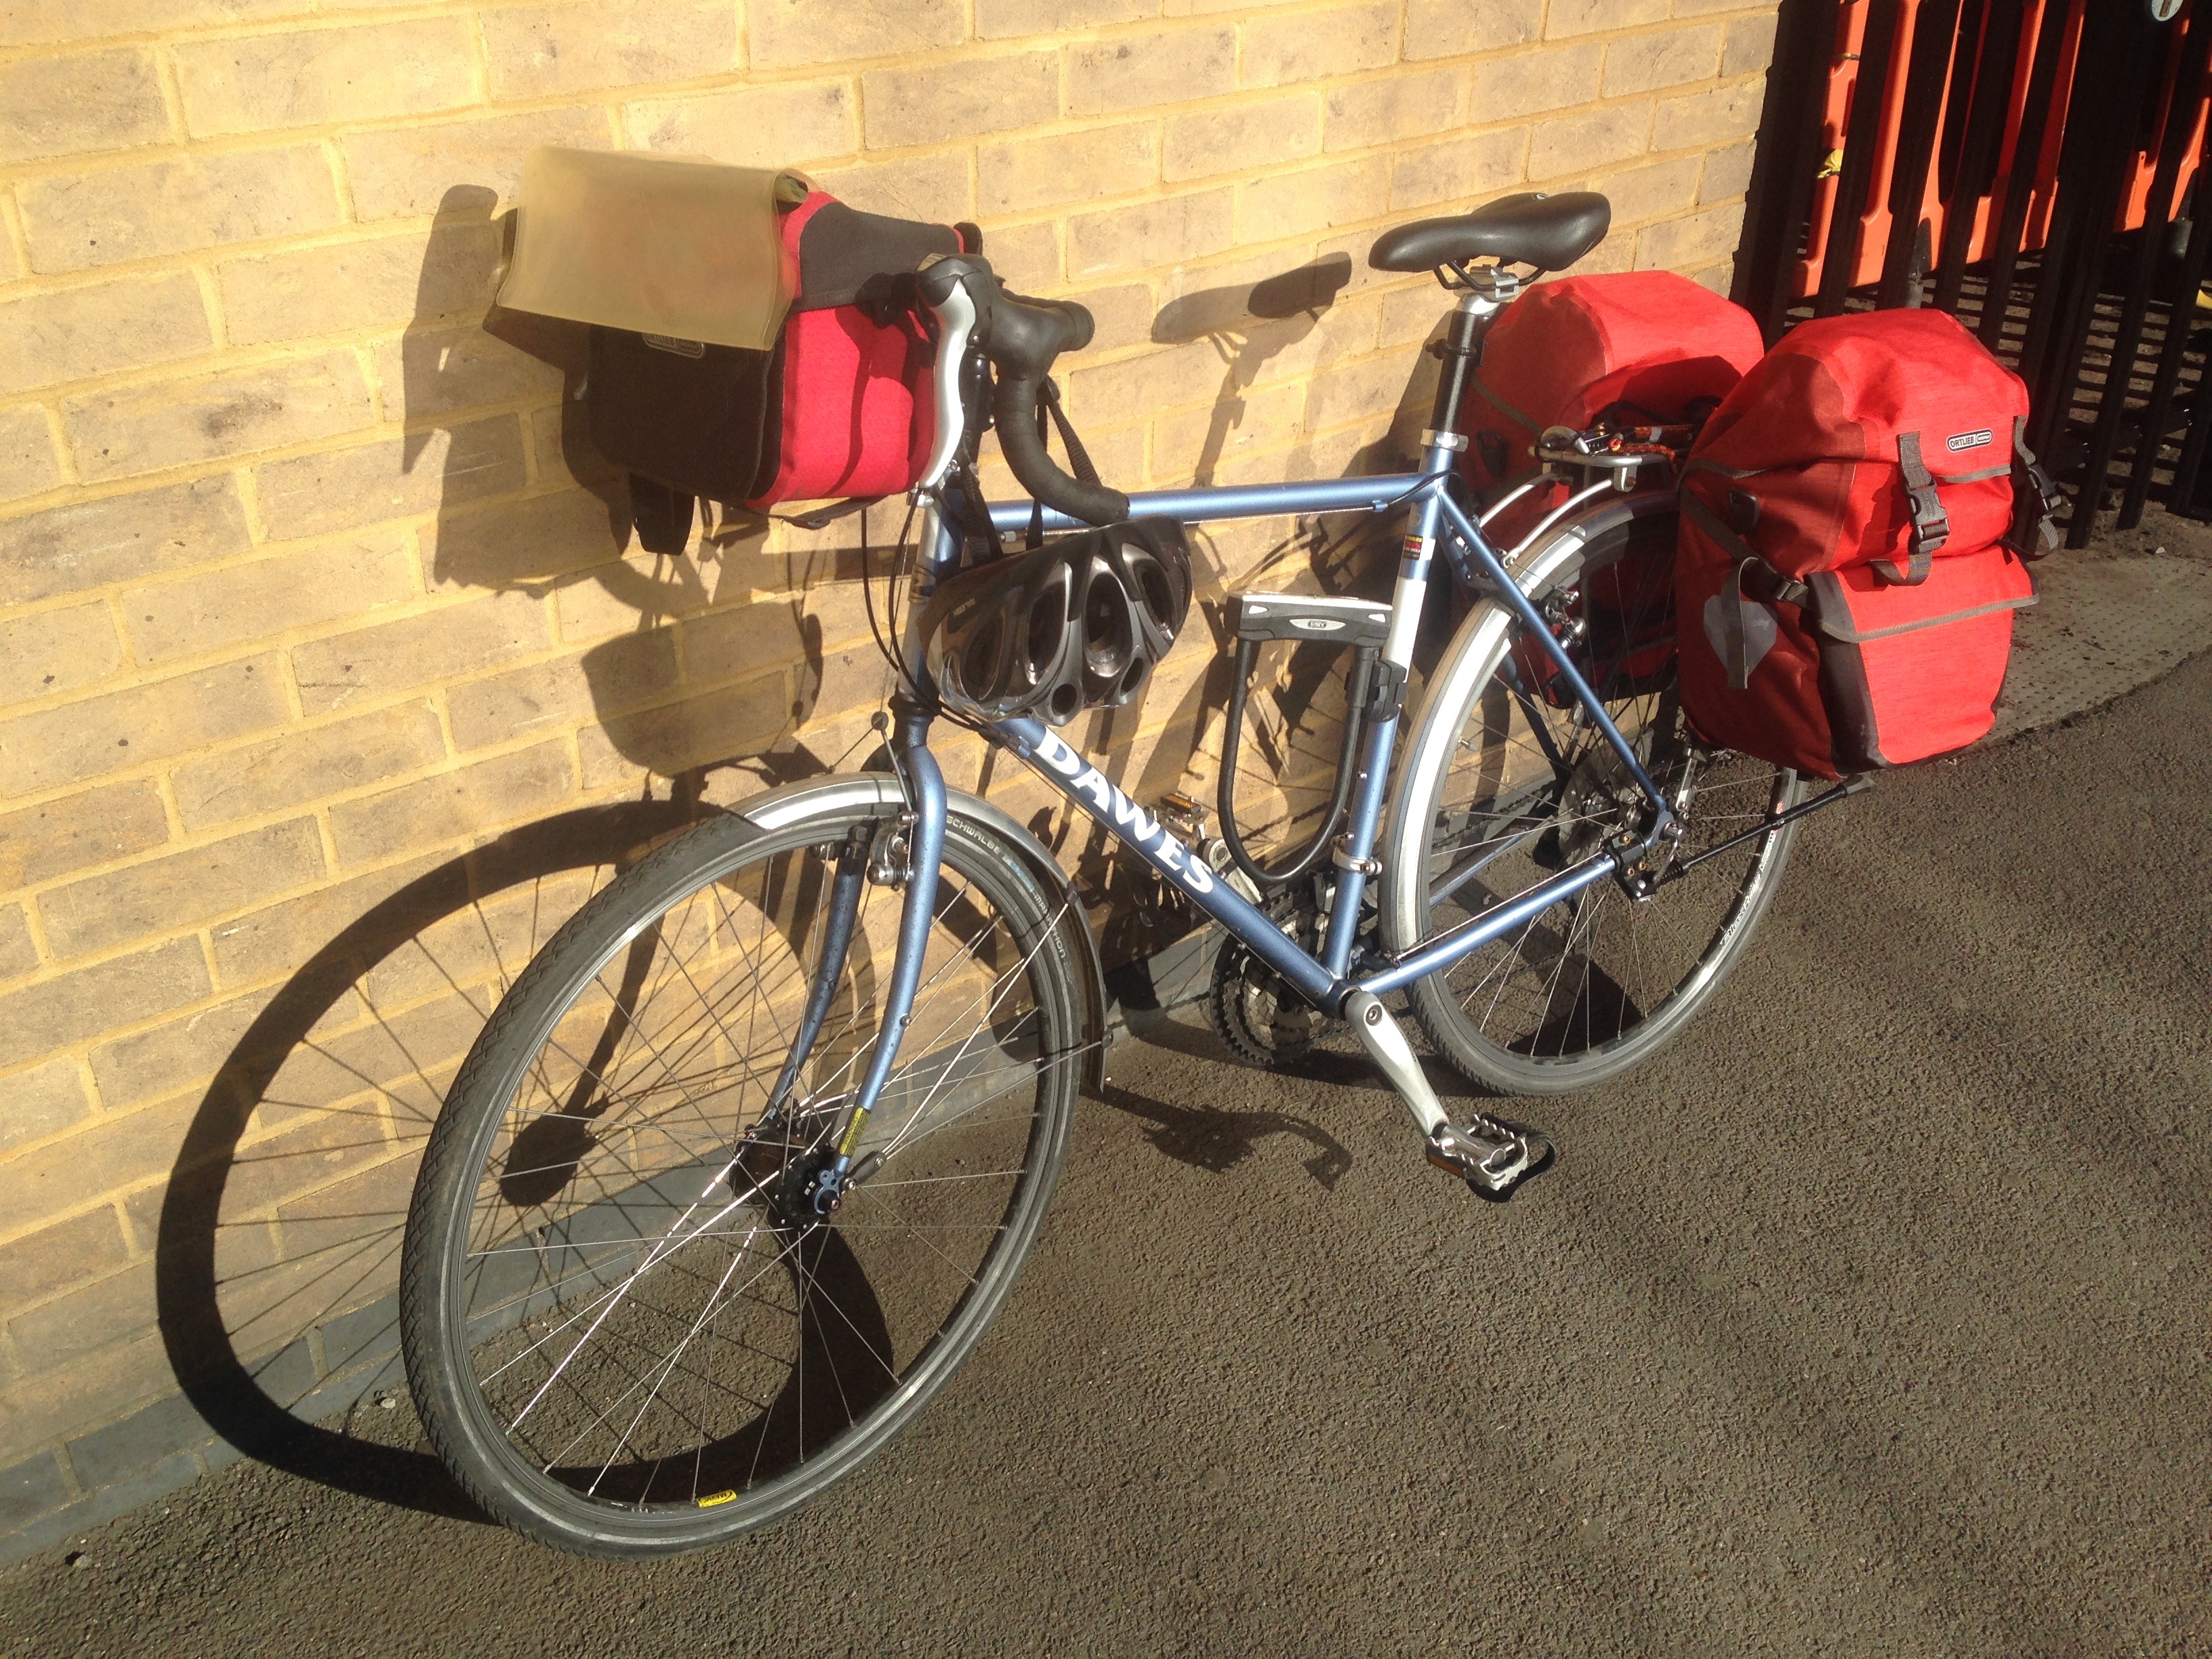 Photograph of a touring bicycle laden with panniers, leaning against a wall.